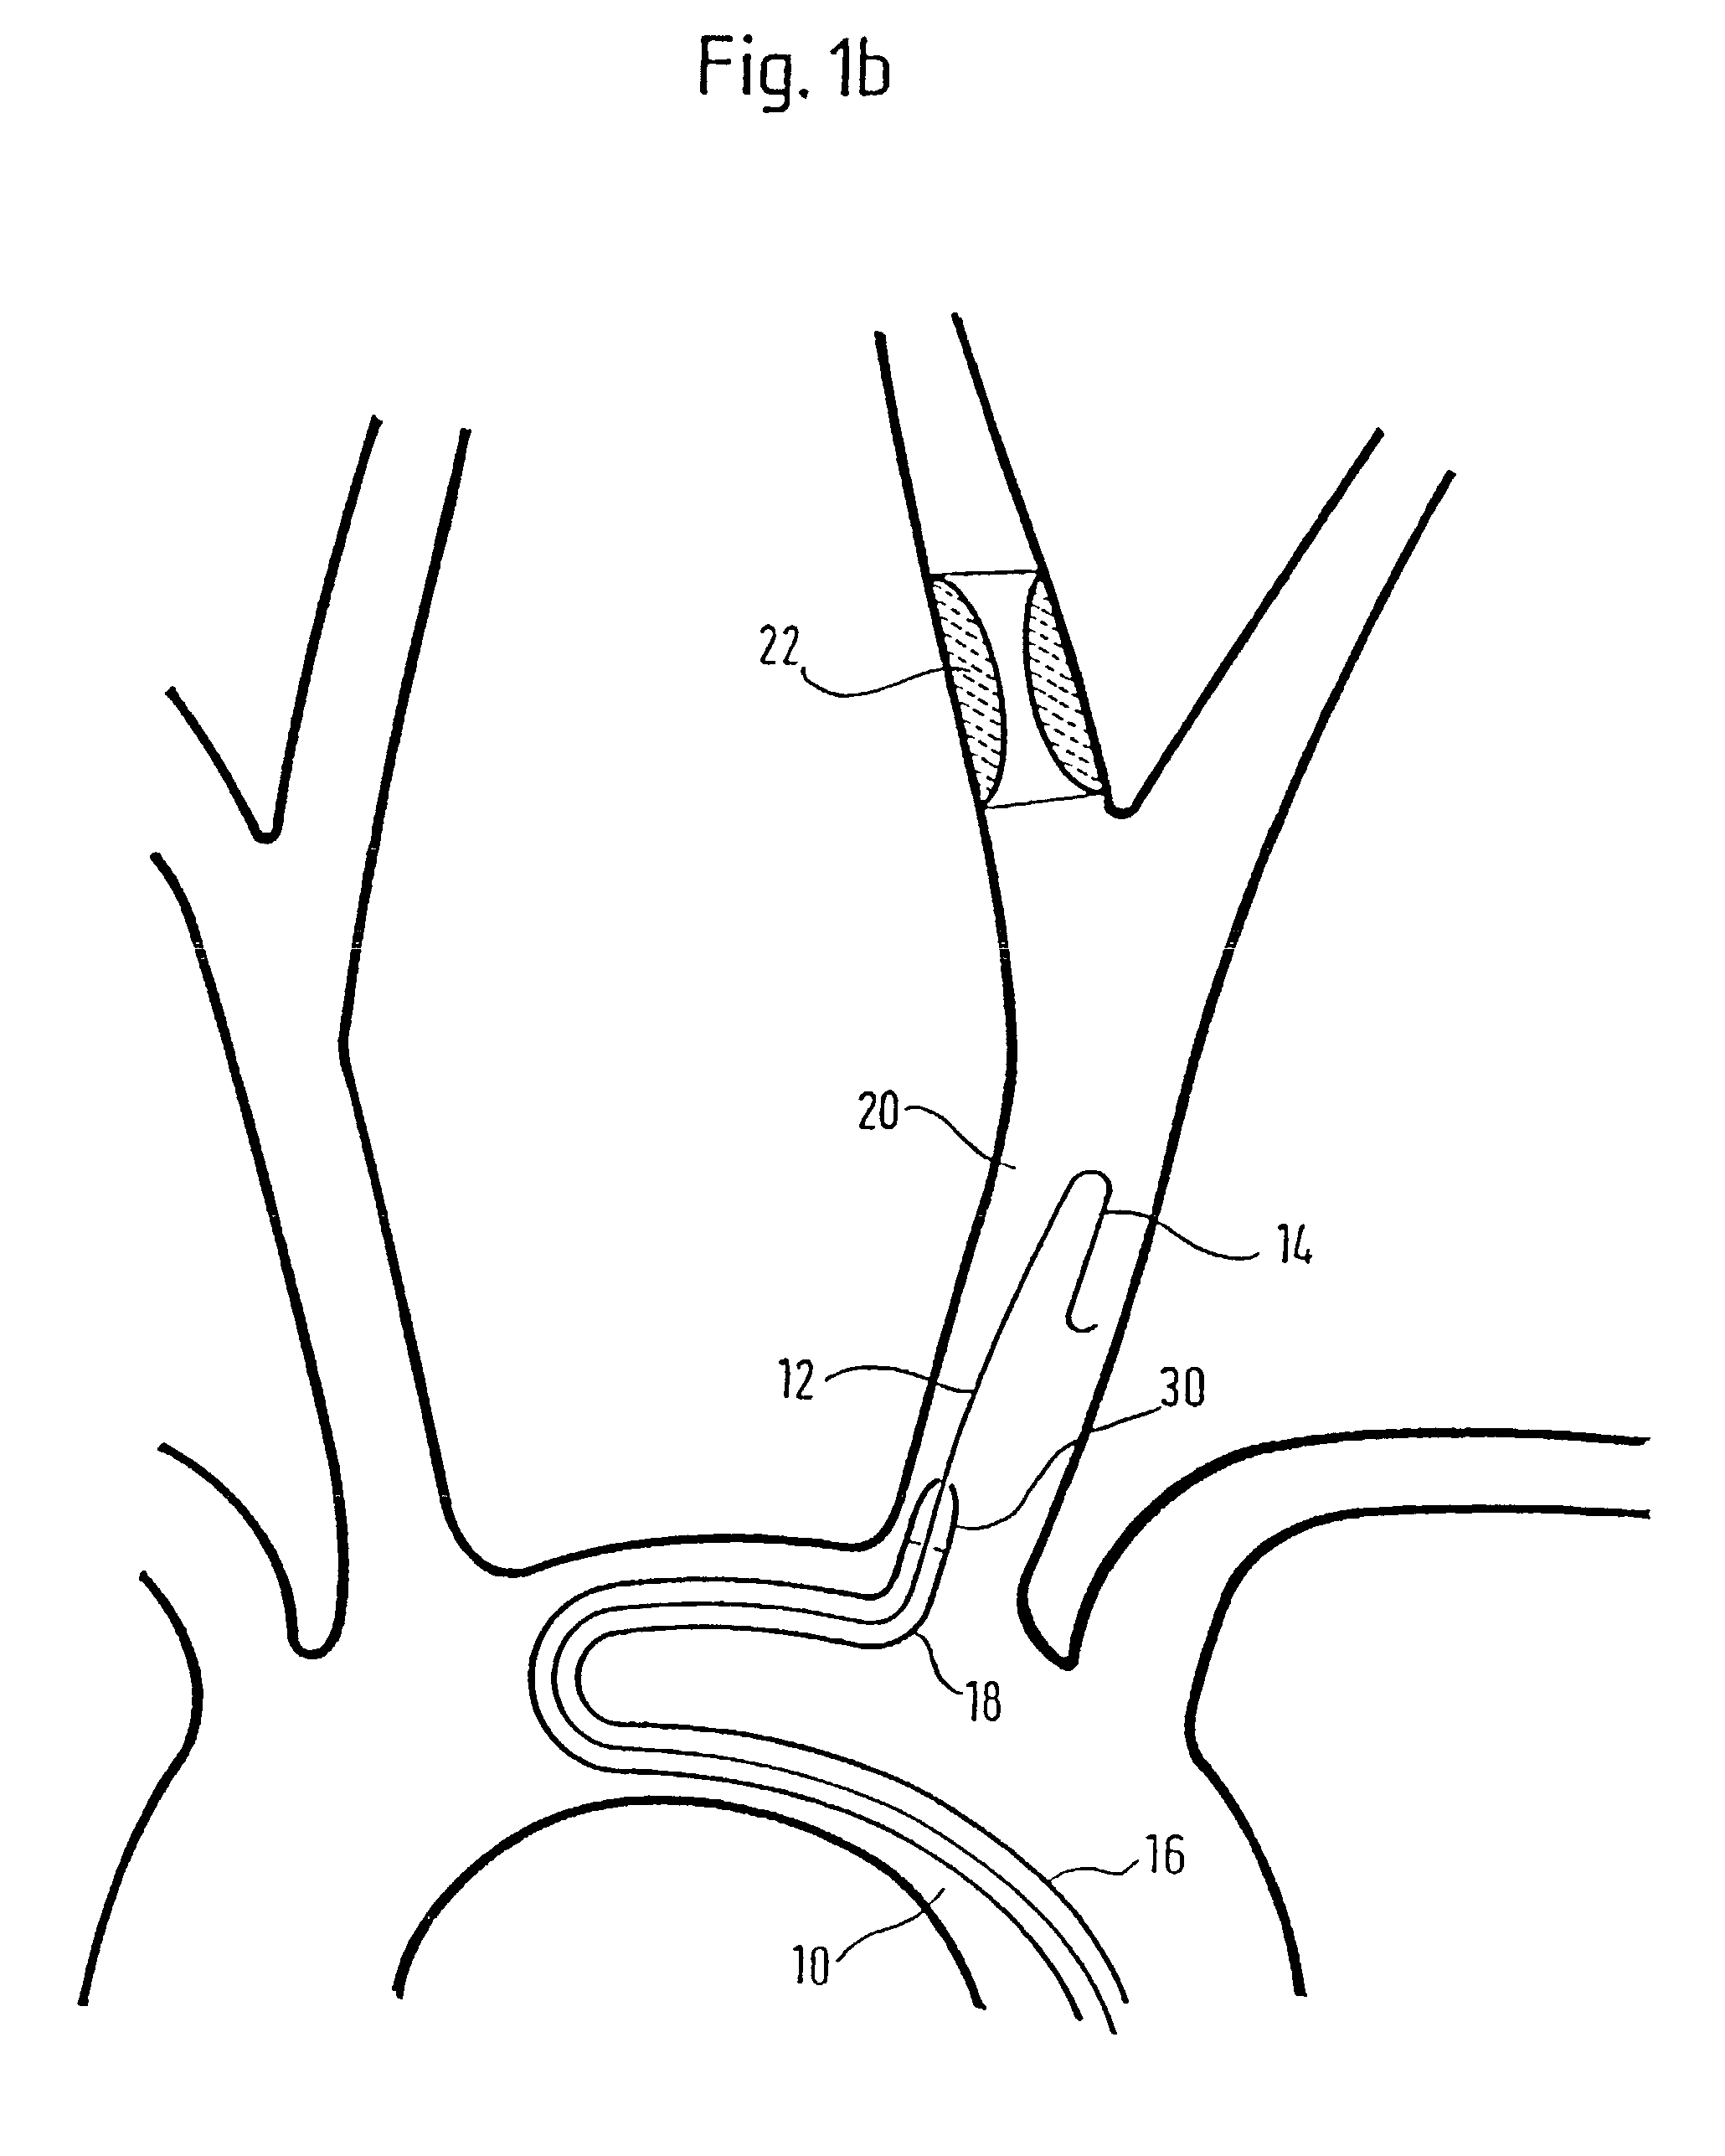 Implant delivery device